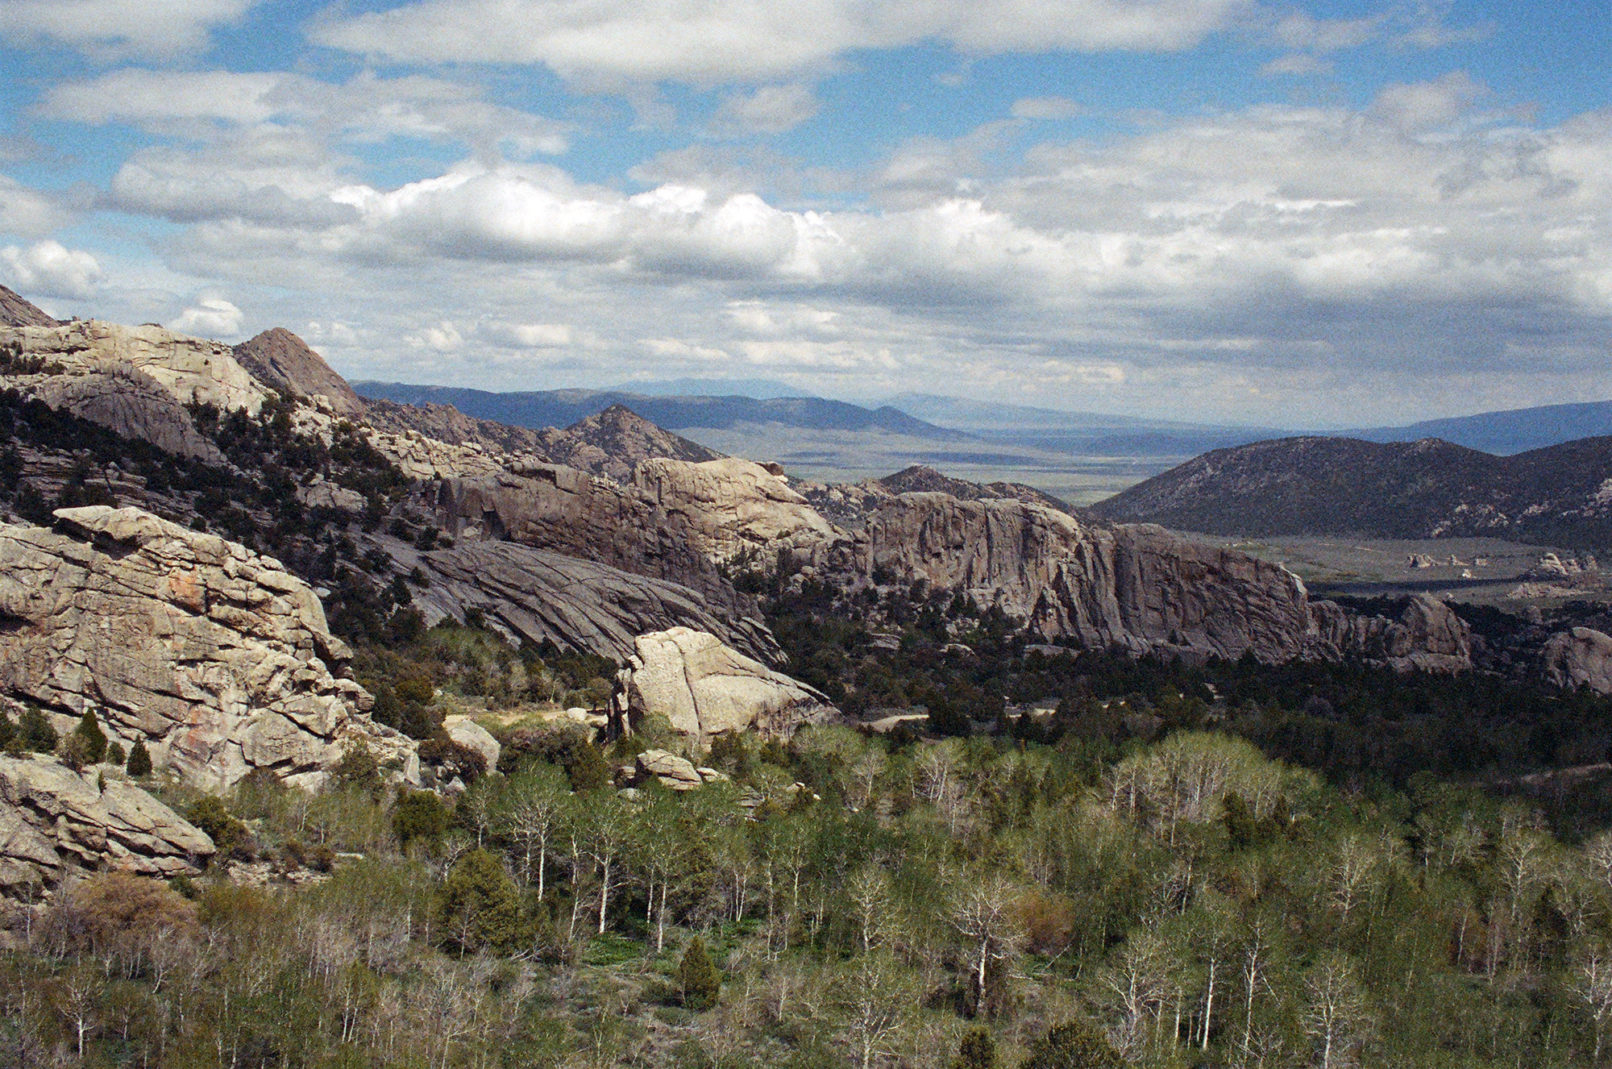 A wide shot of City of Rocks, ID marked with outcroppings of rock formations.